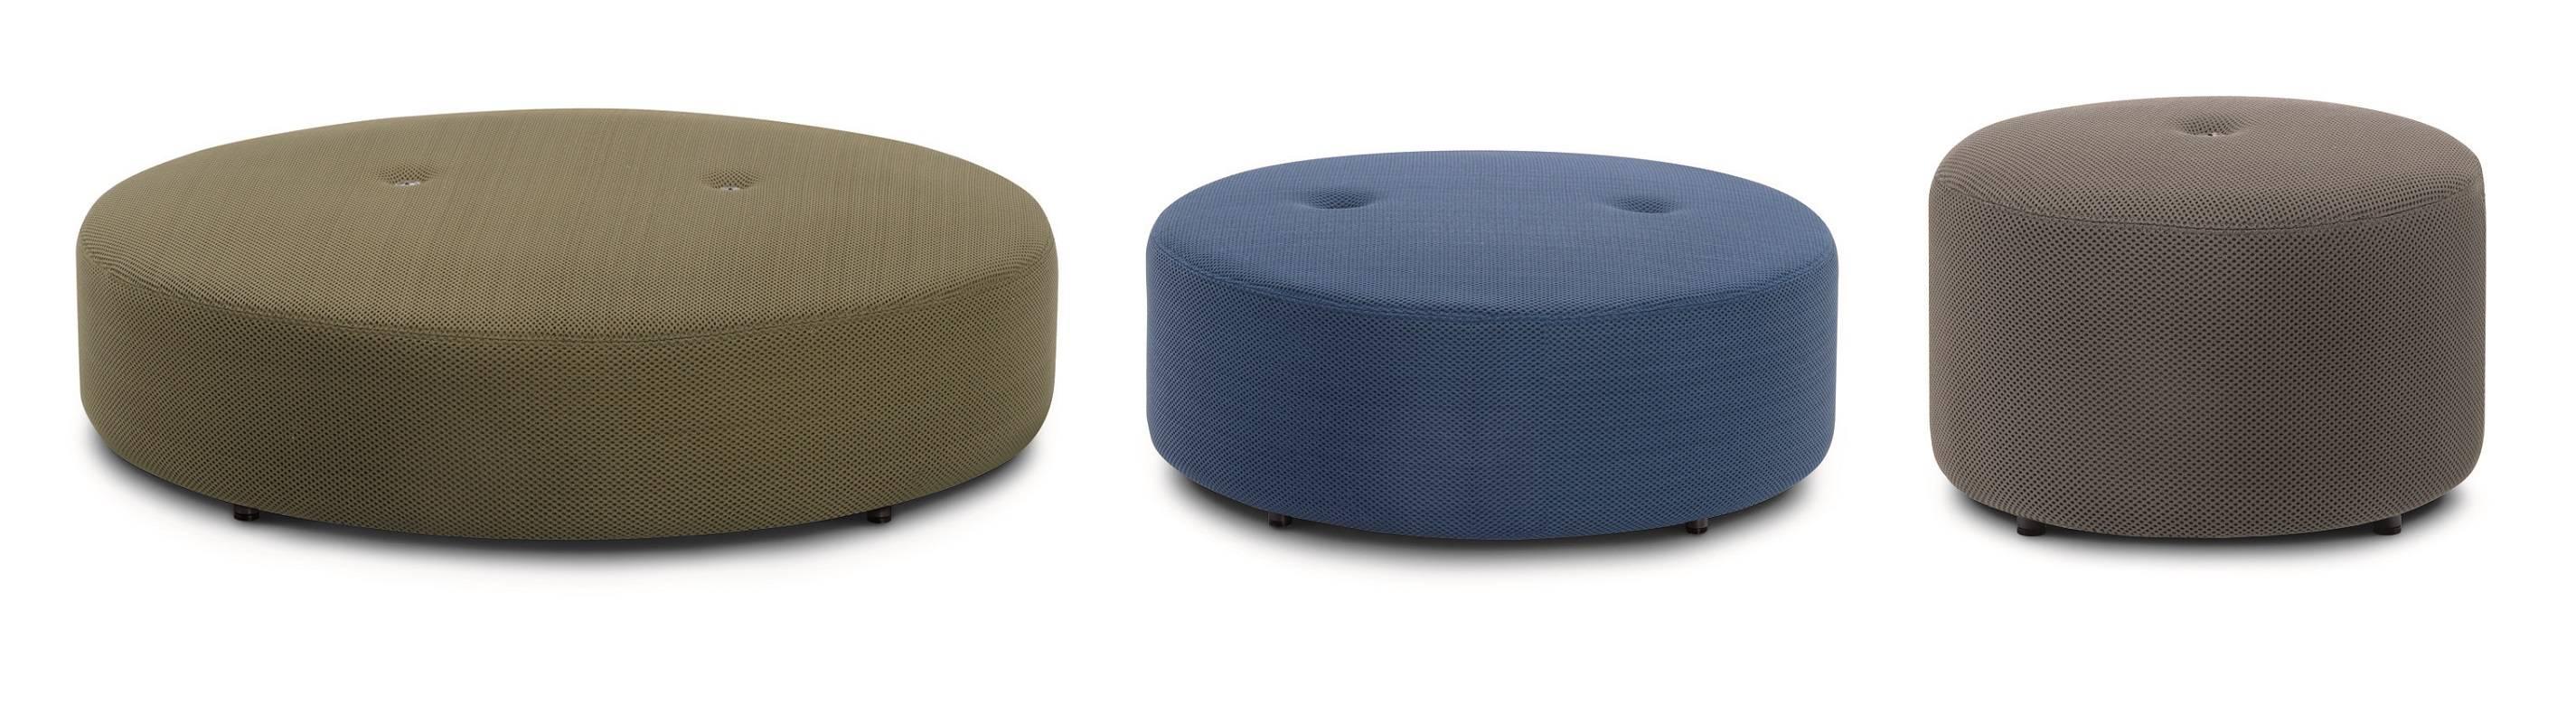 Overview:
Double is an articulated and “total outdoor” seating system designed to recreate in the outside the sensation of relaxing and the exclusive atmosphere of an indoor living space.
Pouf is a very crossed-over complementary item, used to